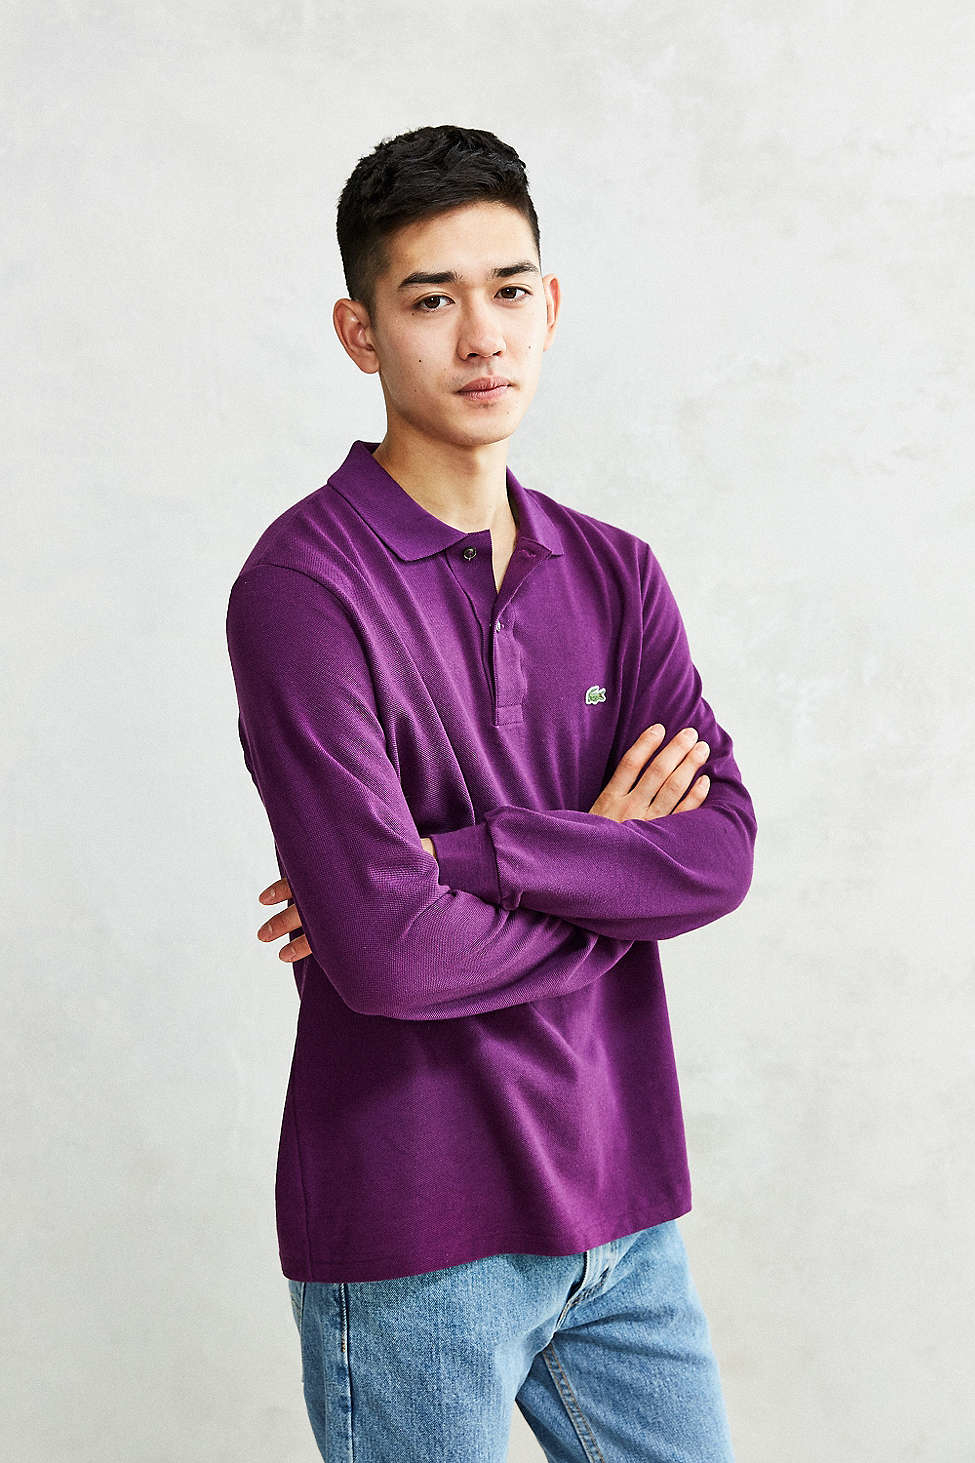 Lacoste Cotton Long-sleeve Polo Shirt in Purple for Men - Lyst